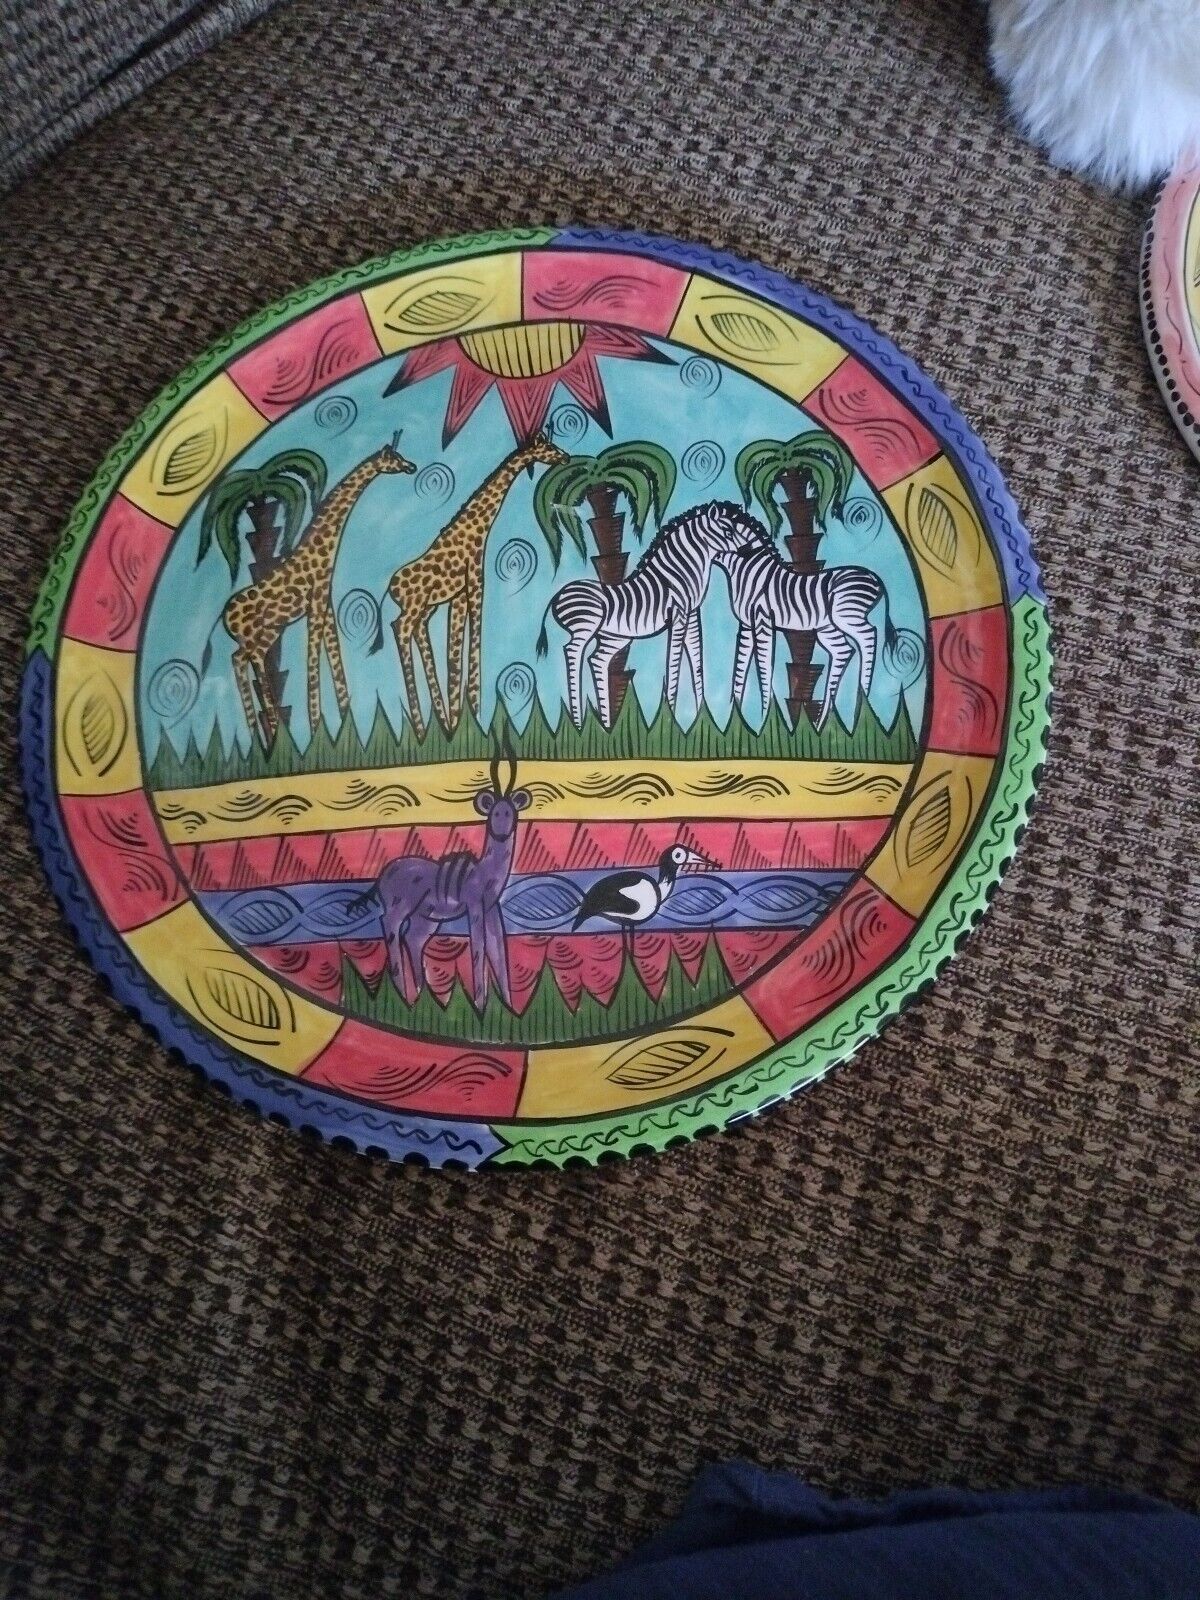 Penzo African Art Plate 12” Zimbabwe Hand Painted Signed 1998 Zebras Camels